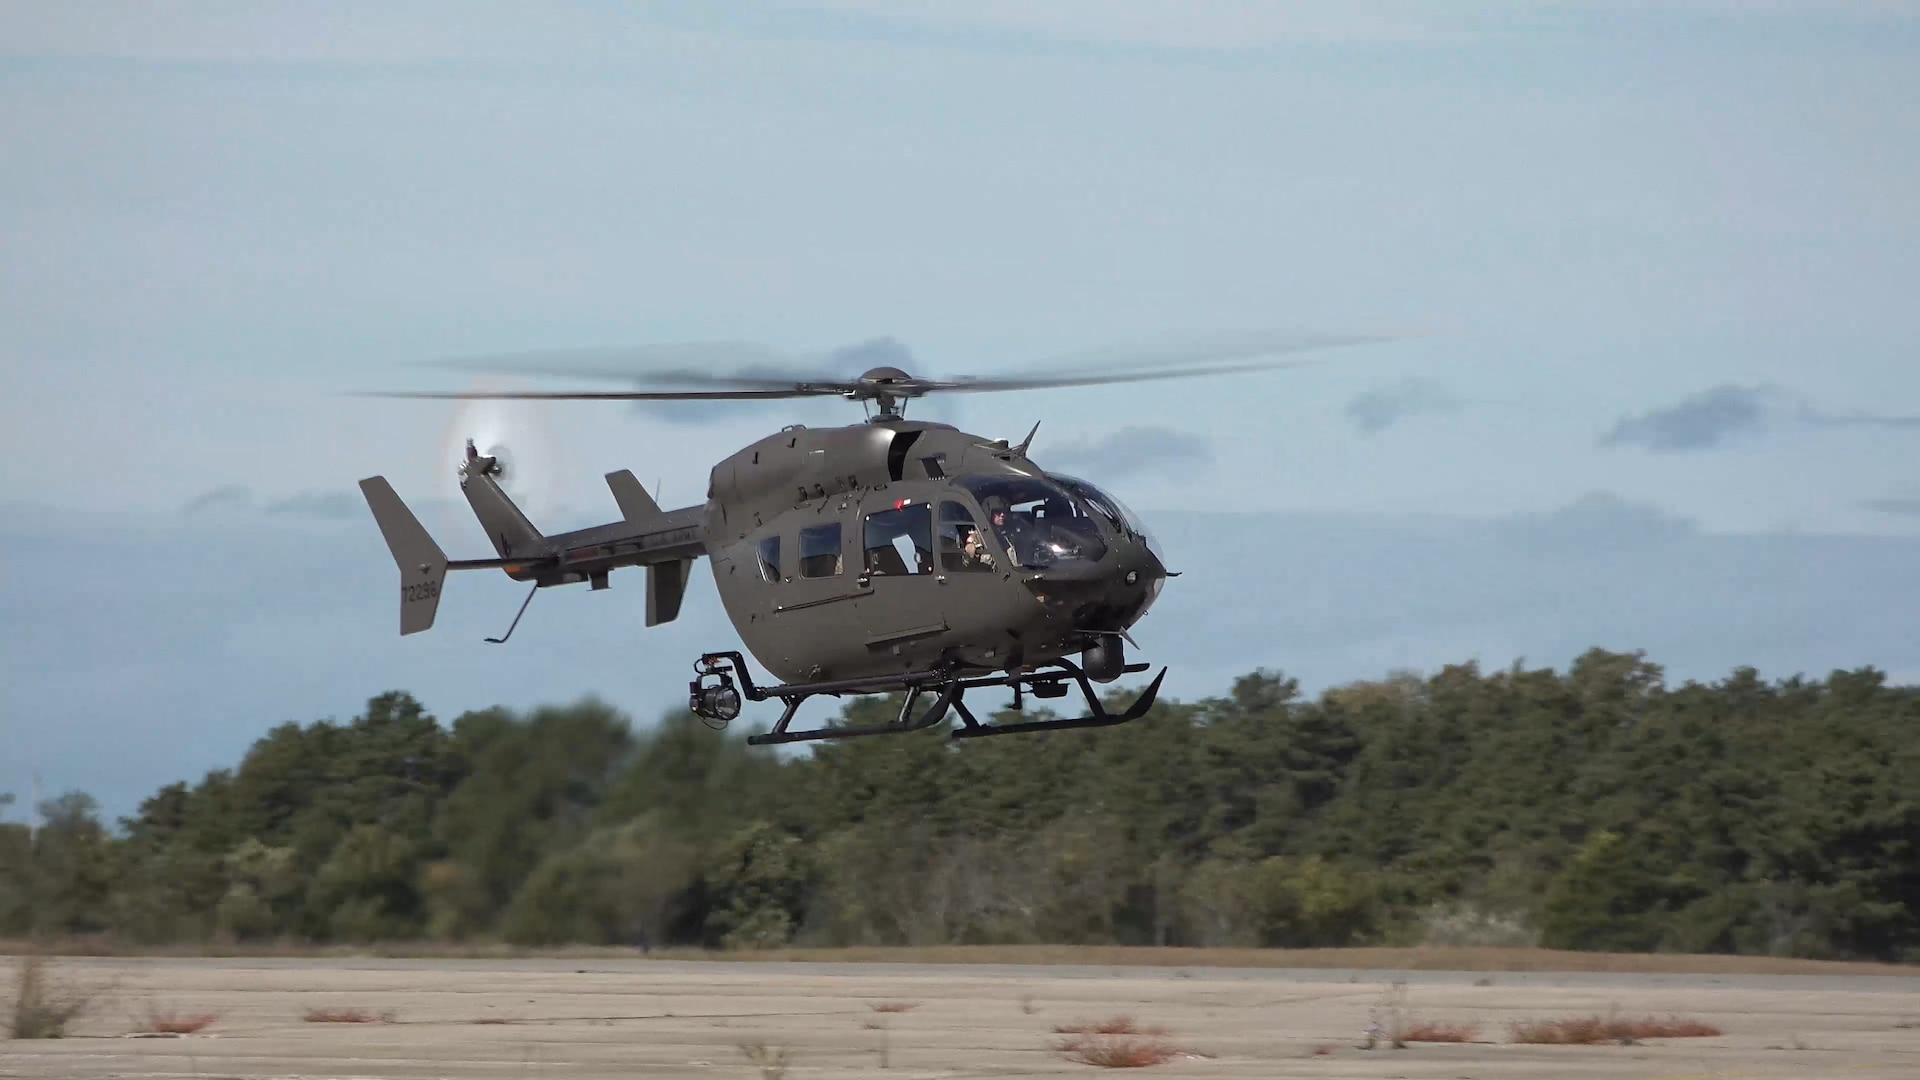 Maj. Gen. Gary W. Keefe, the adjutant general of the Massachusetts National Guard, takes a ride in one of the state's new Lakota helicopters during a demonstration of the Lakota camera/video downlink feed at Joint Base Cape Cod, Mass., Oct. 6, 2019.